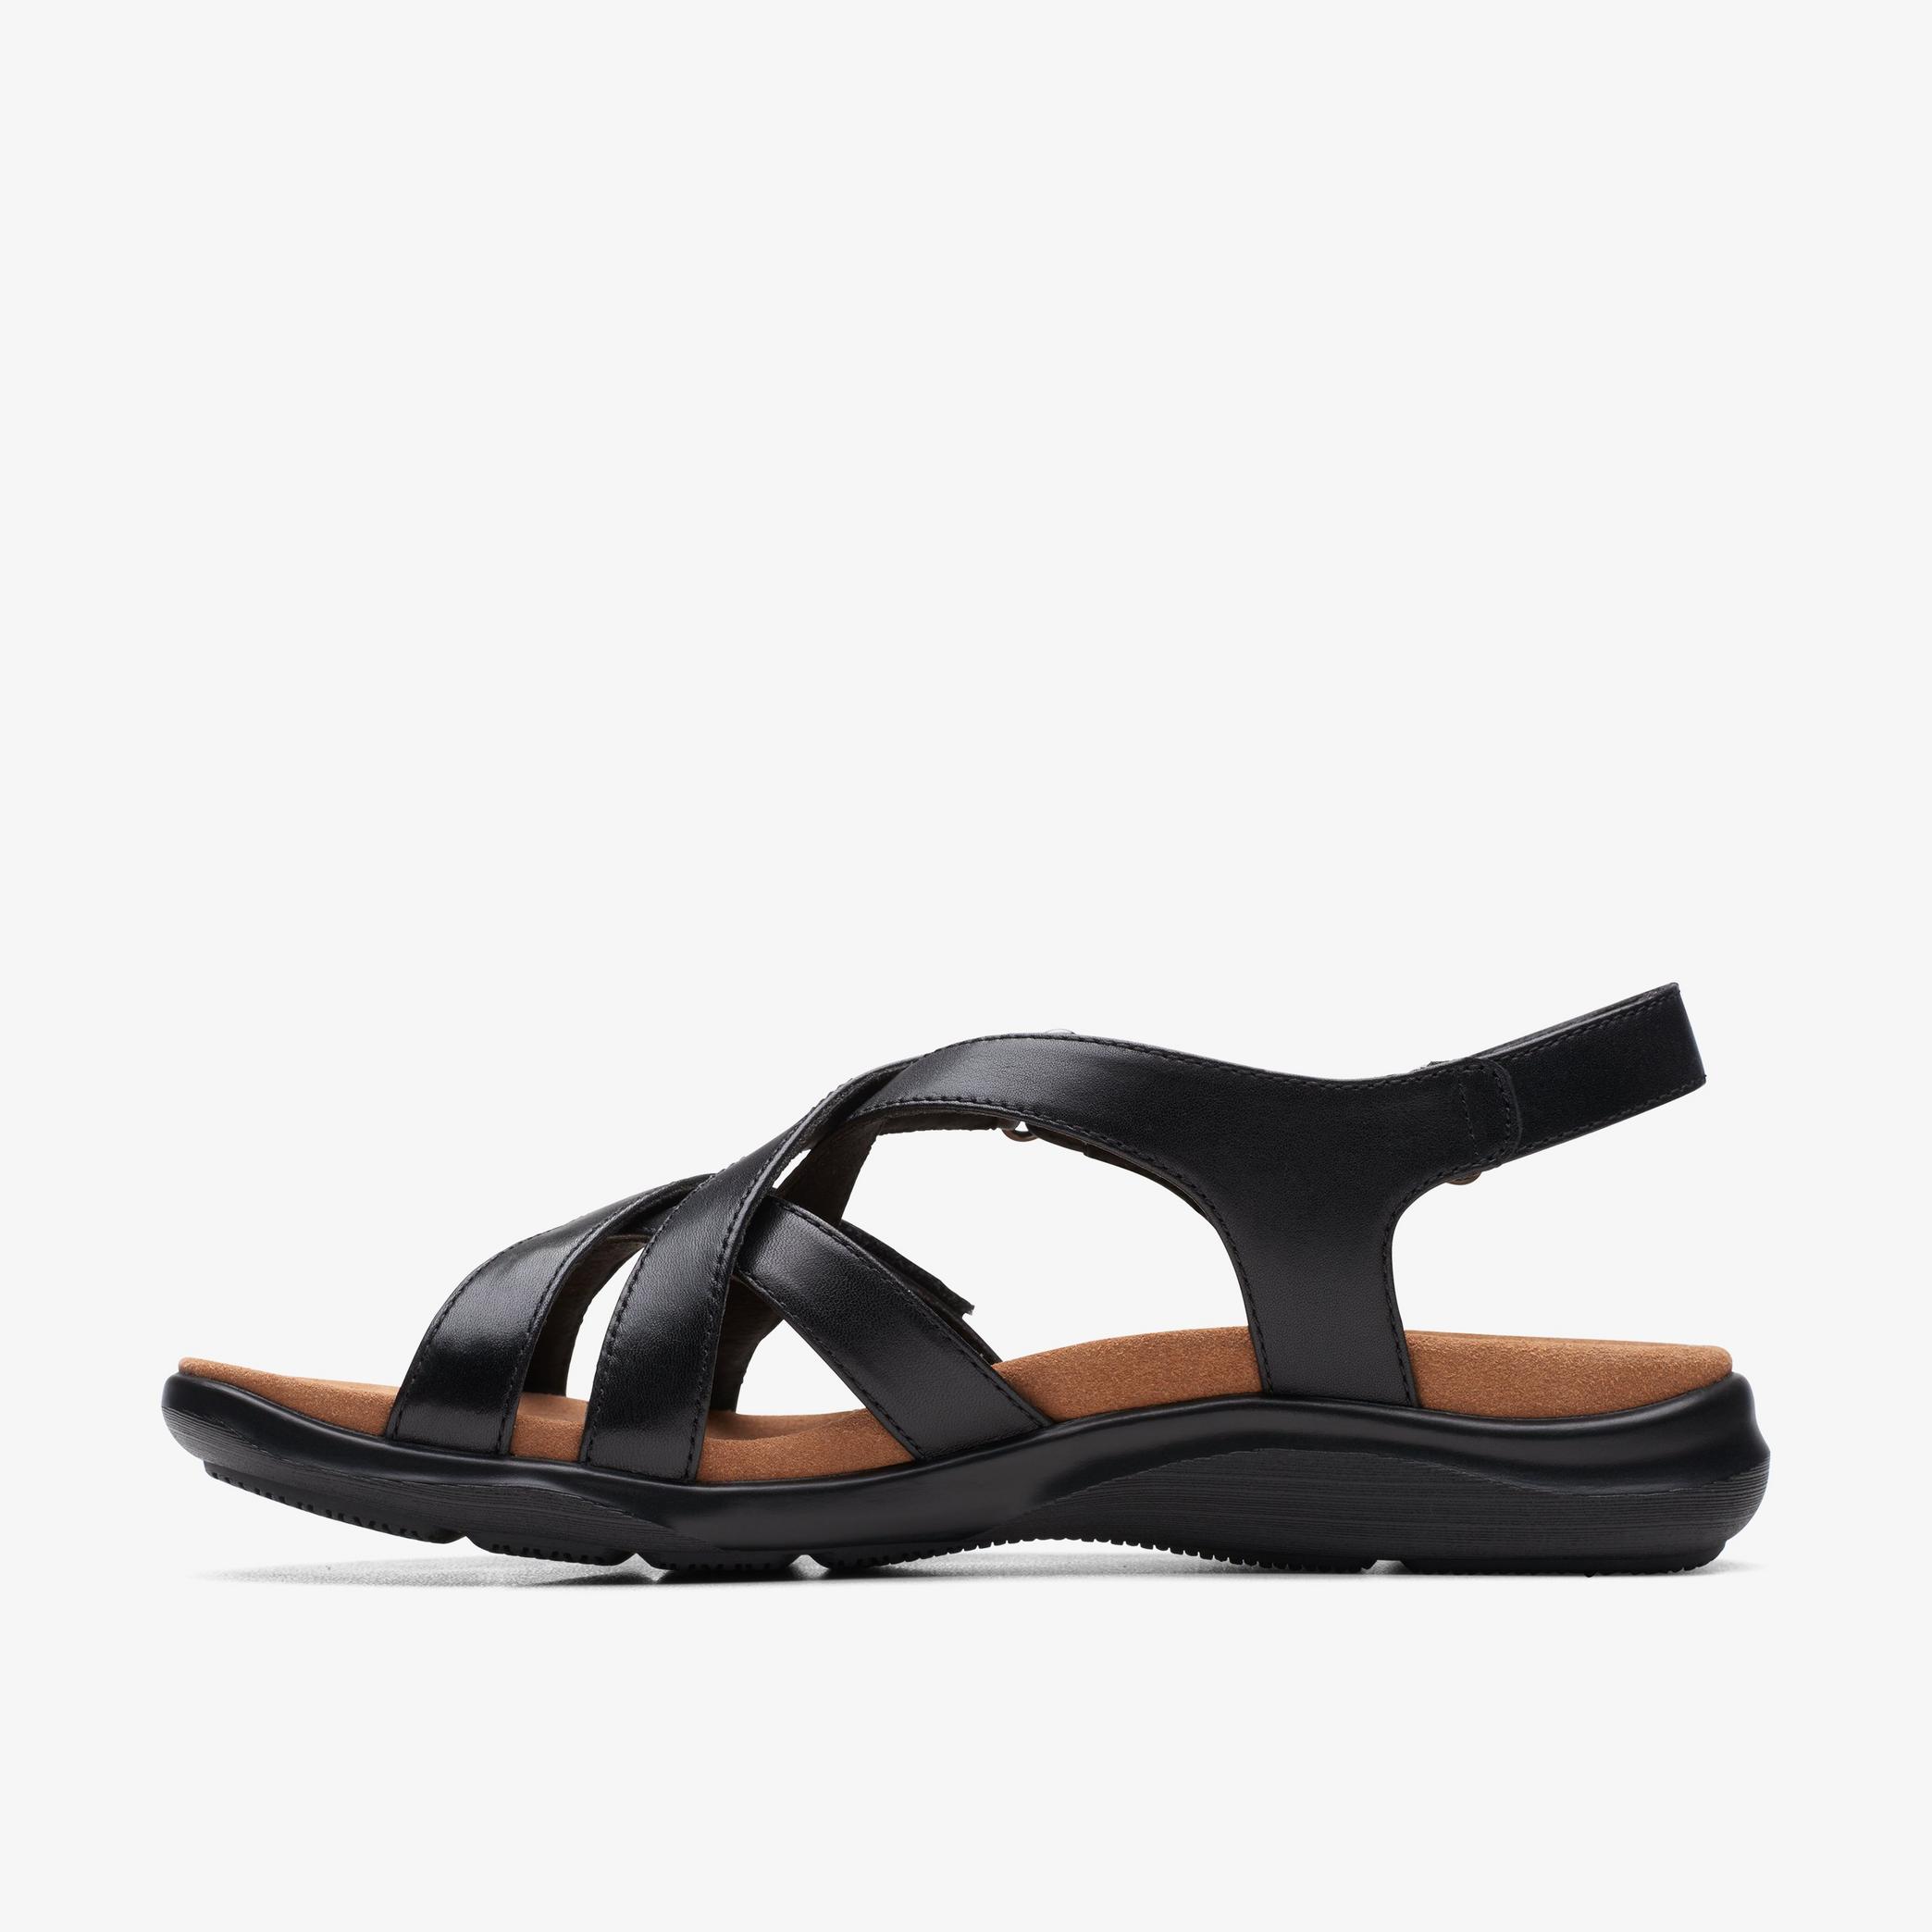 Kitly Go Black Leather Flat Sandals, view 2 of 6